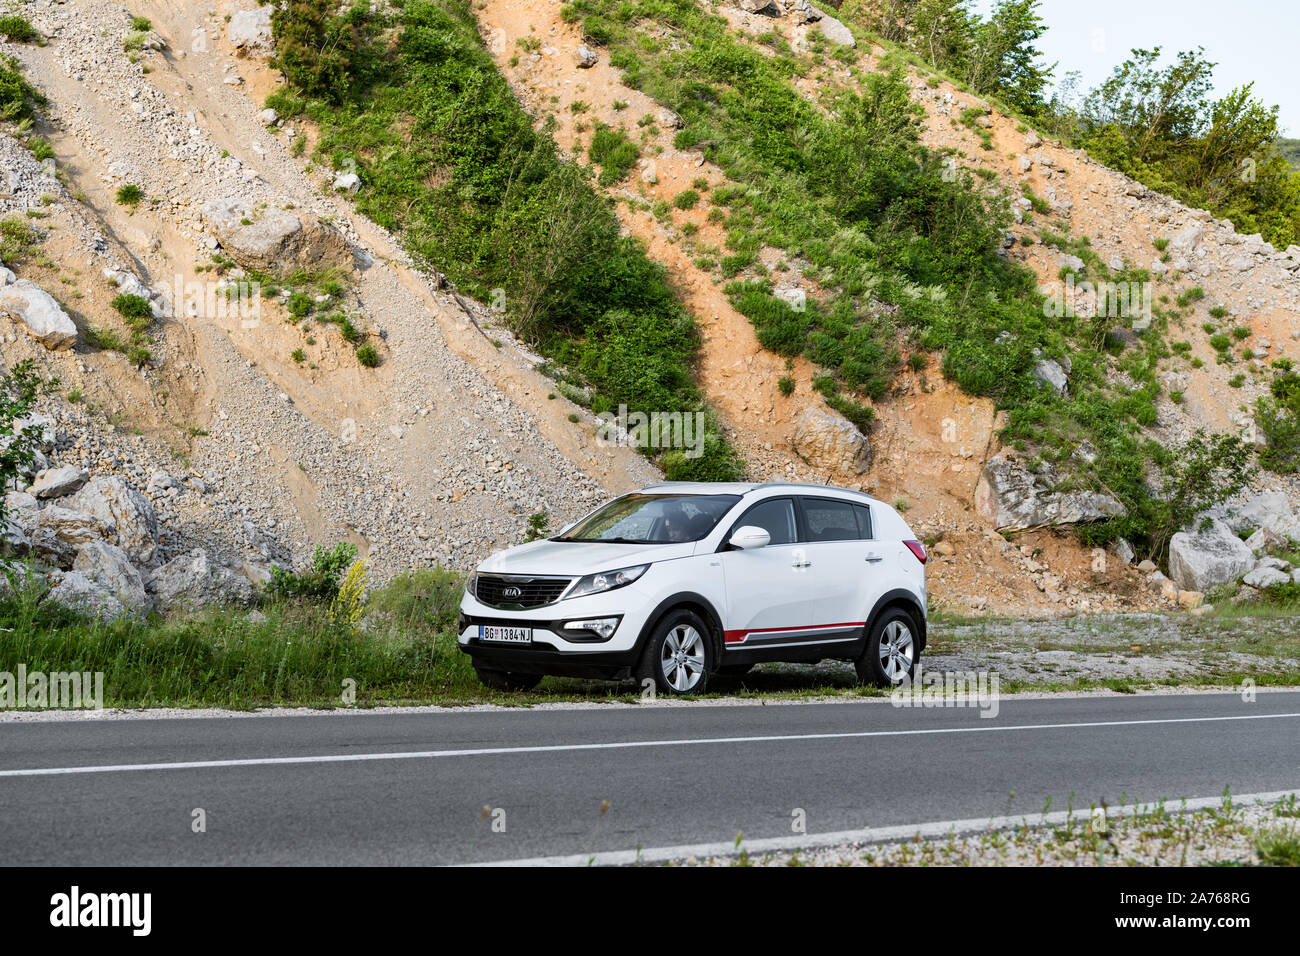 Car Kia Sportage 2.0 CRDI awd or 4x4, white color, parked on gravel, near highway, which past thru the rocky mountains Stock Photo